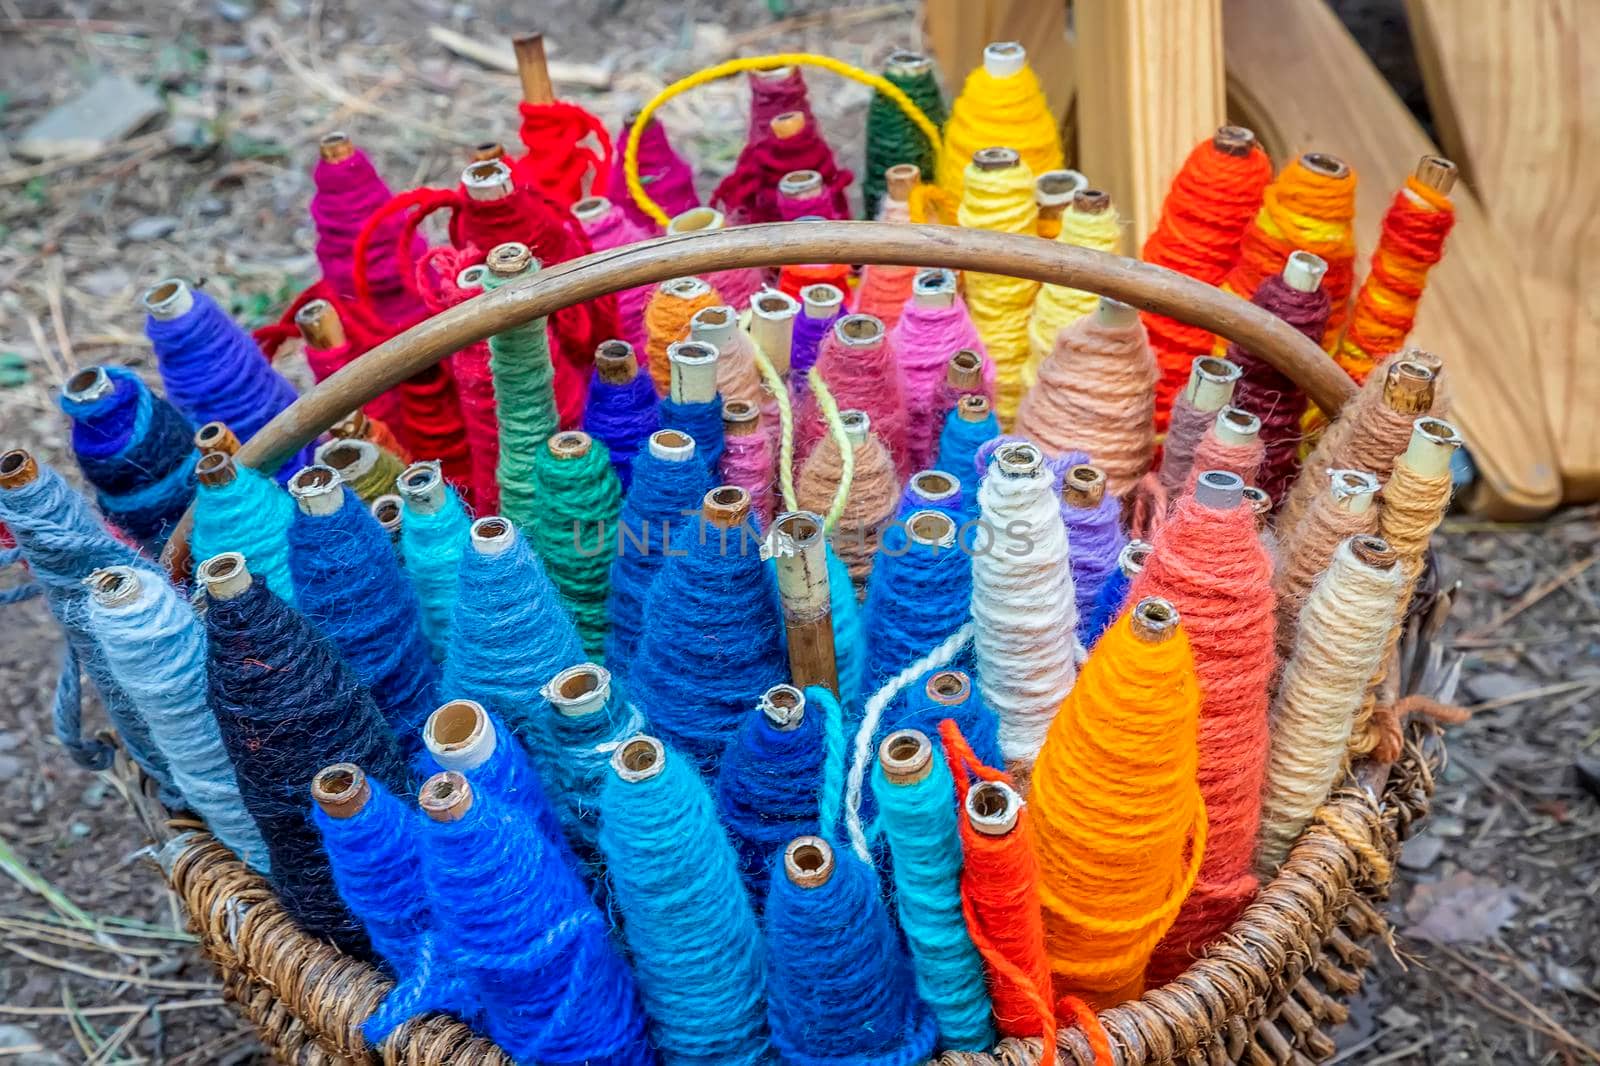 Colored thread spools of thread, textiles, background. Set of colored threads for sewing in a basket.